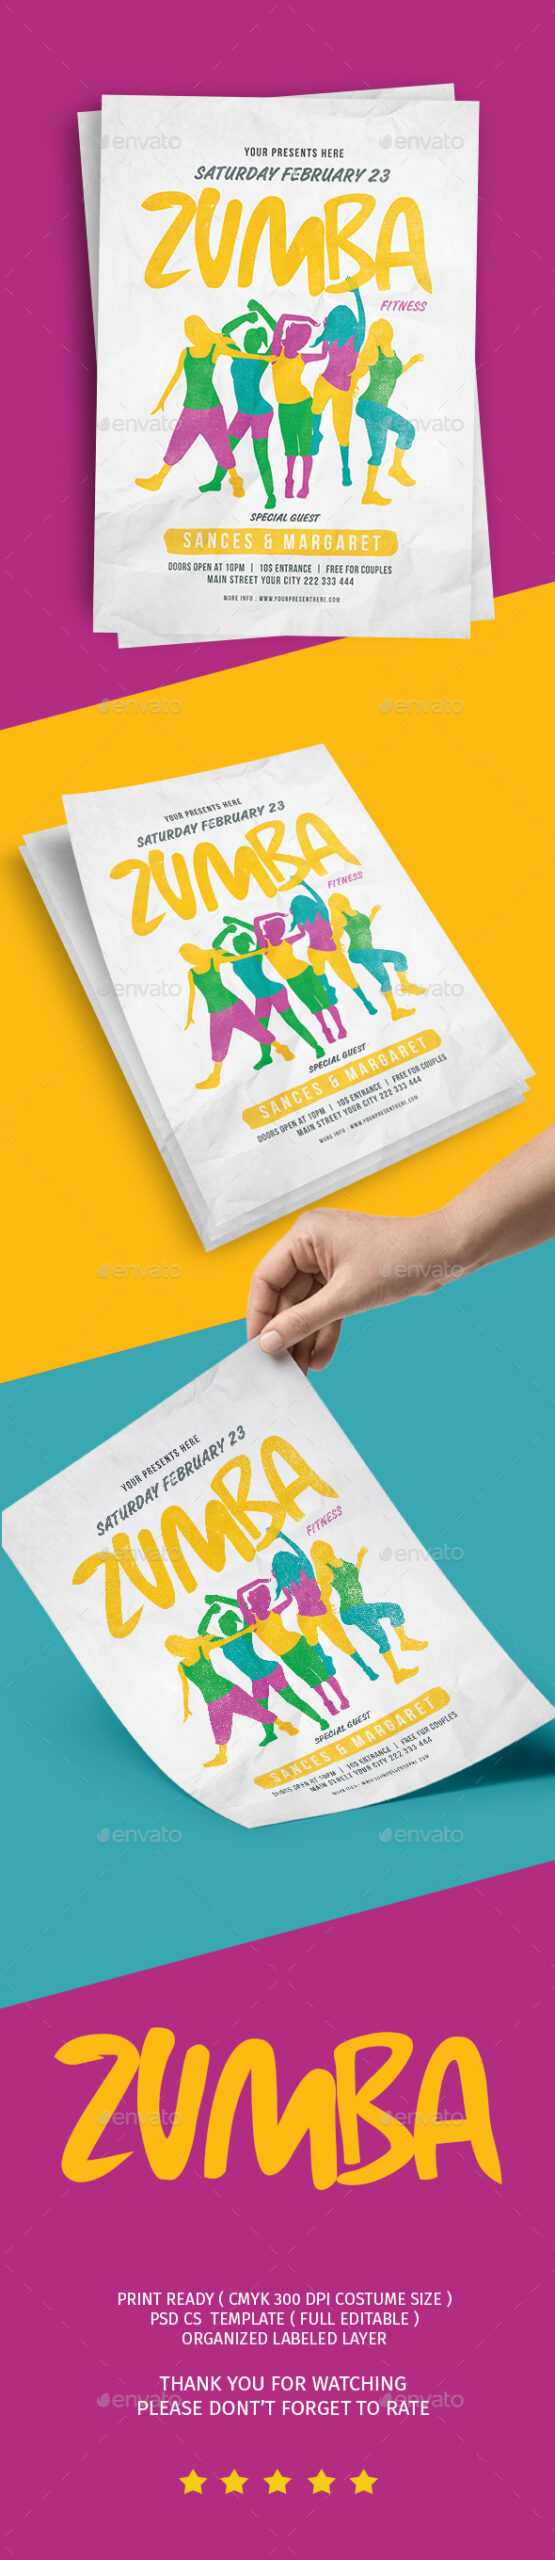 Zumba Flyer Graphics, Designs & Templates From Graphicriver With Free Zumba Flyer Templates